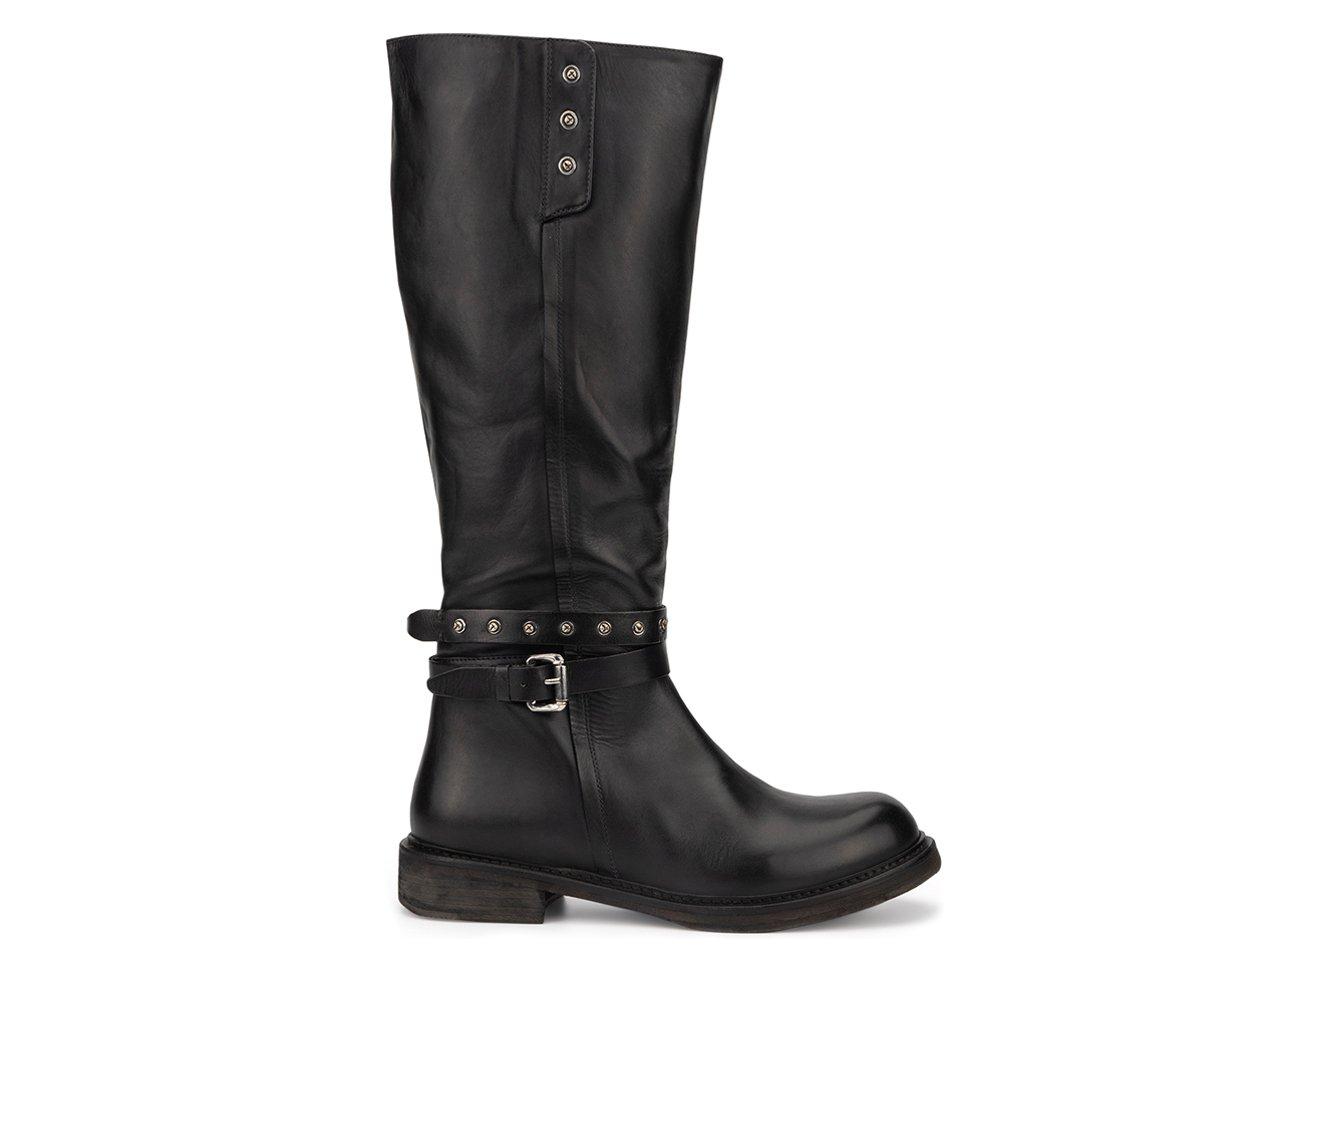 Vintage Foundry Co Reign Knee High Boots